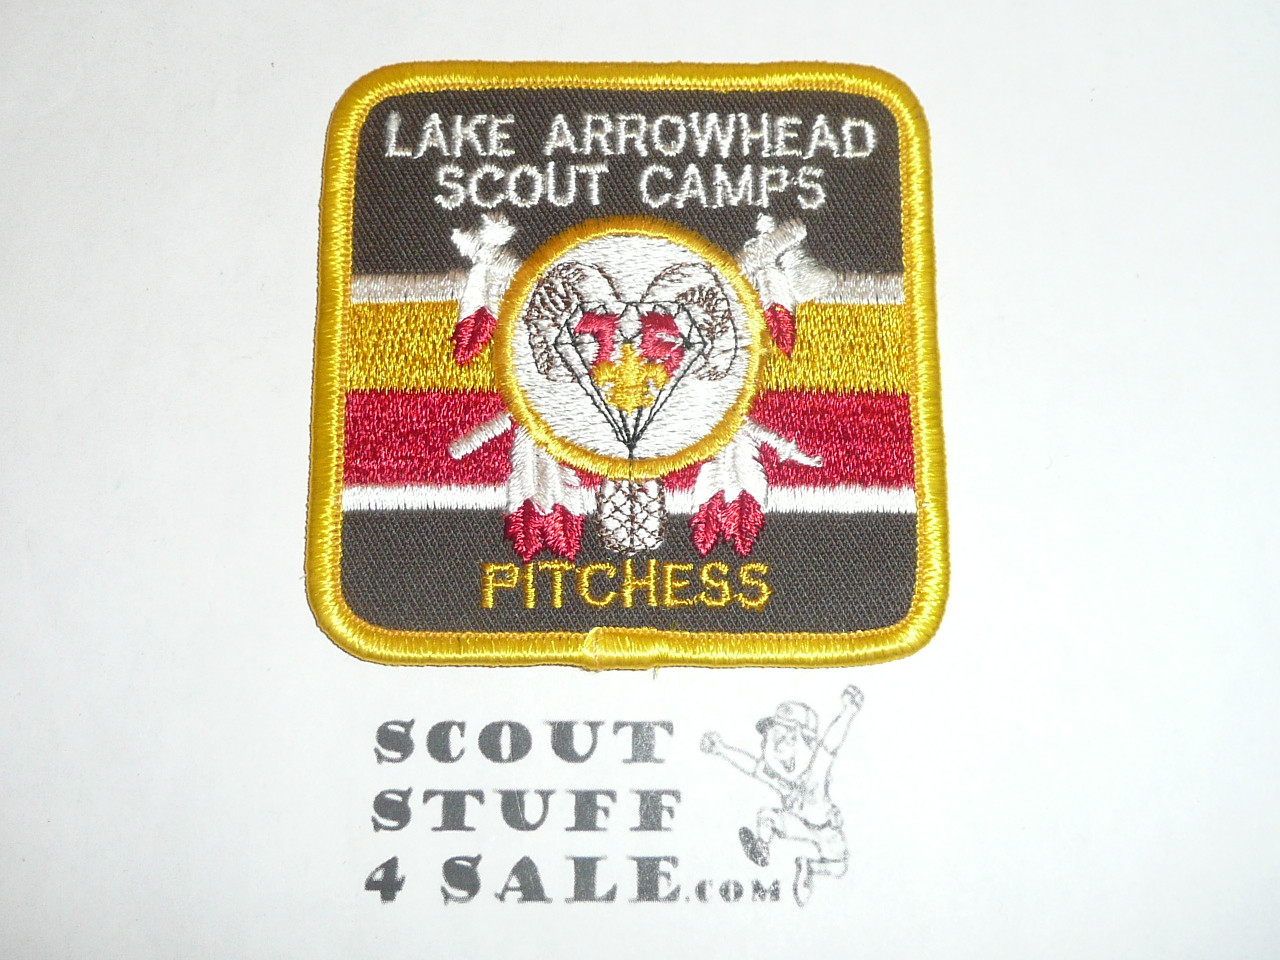 Lake Arrowhead Scout Camps, Camp Pitchess Patch, 1985